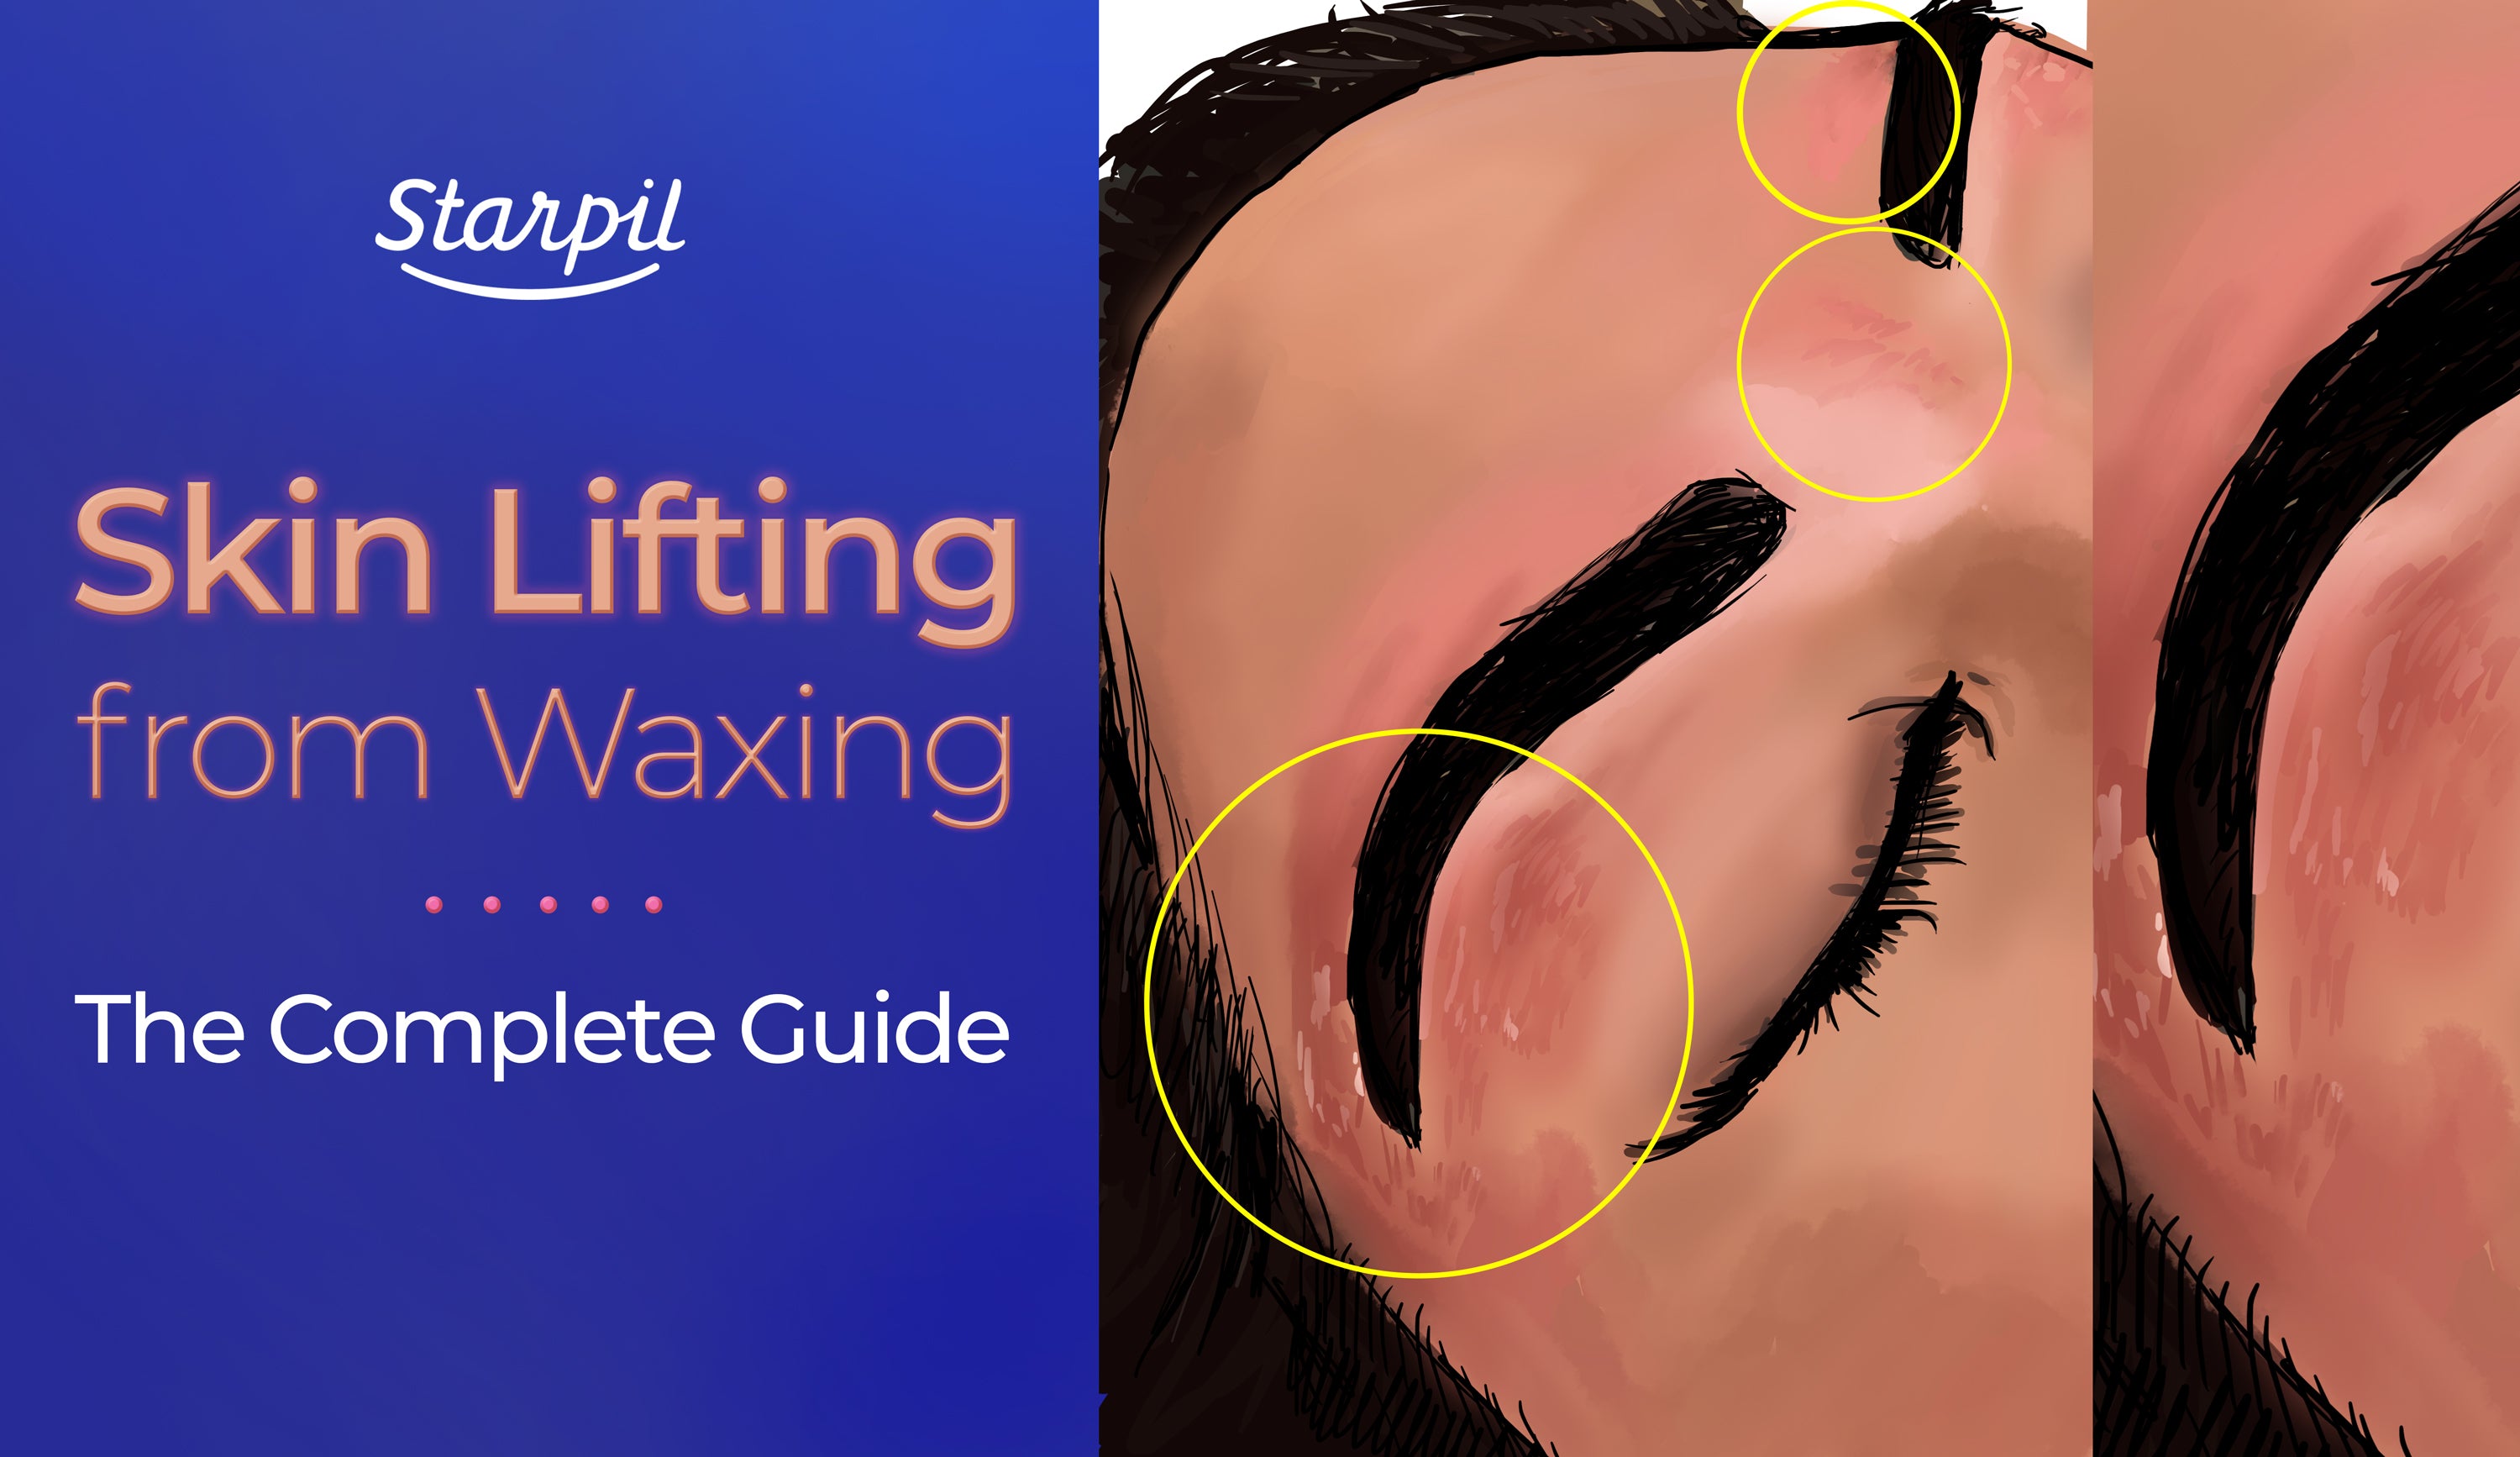 Skin Lifting from Waxing, The Complete Guide